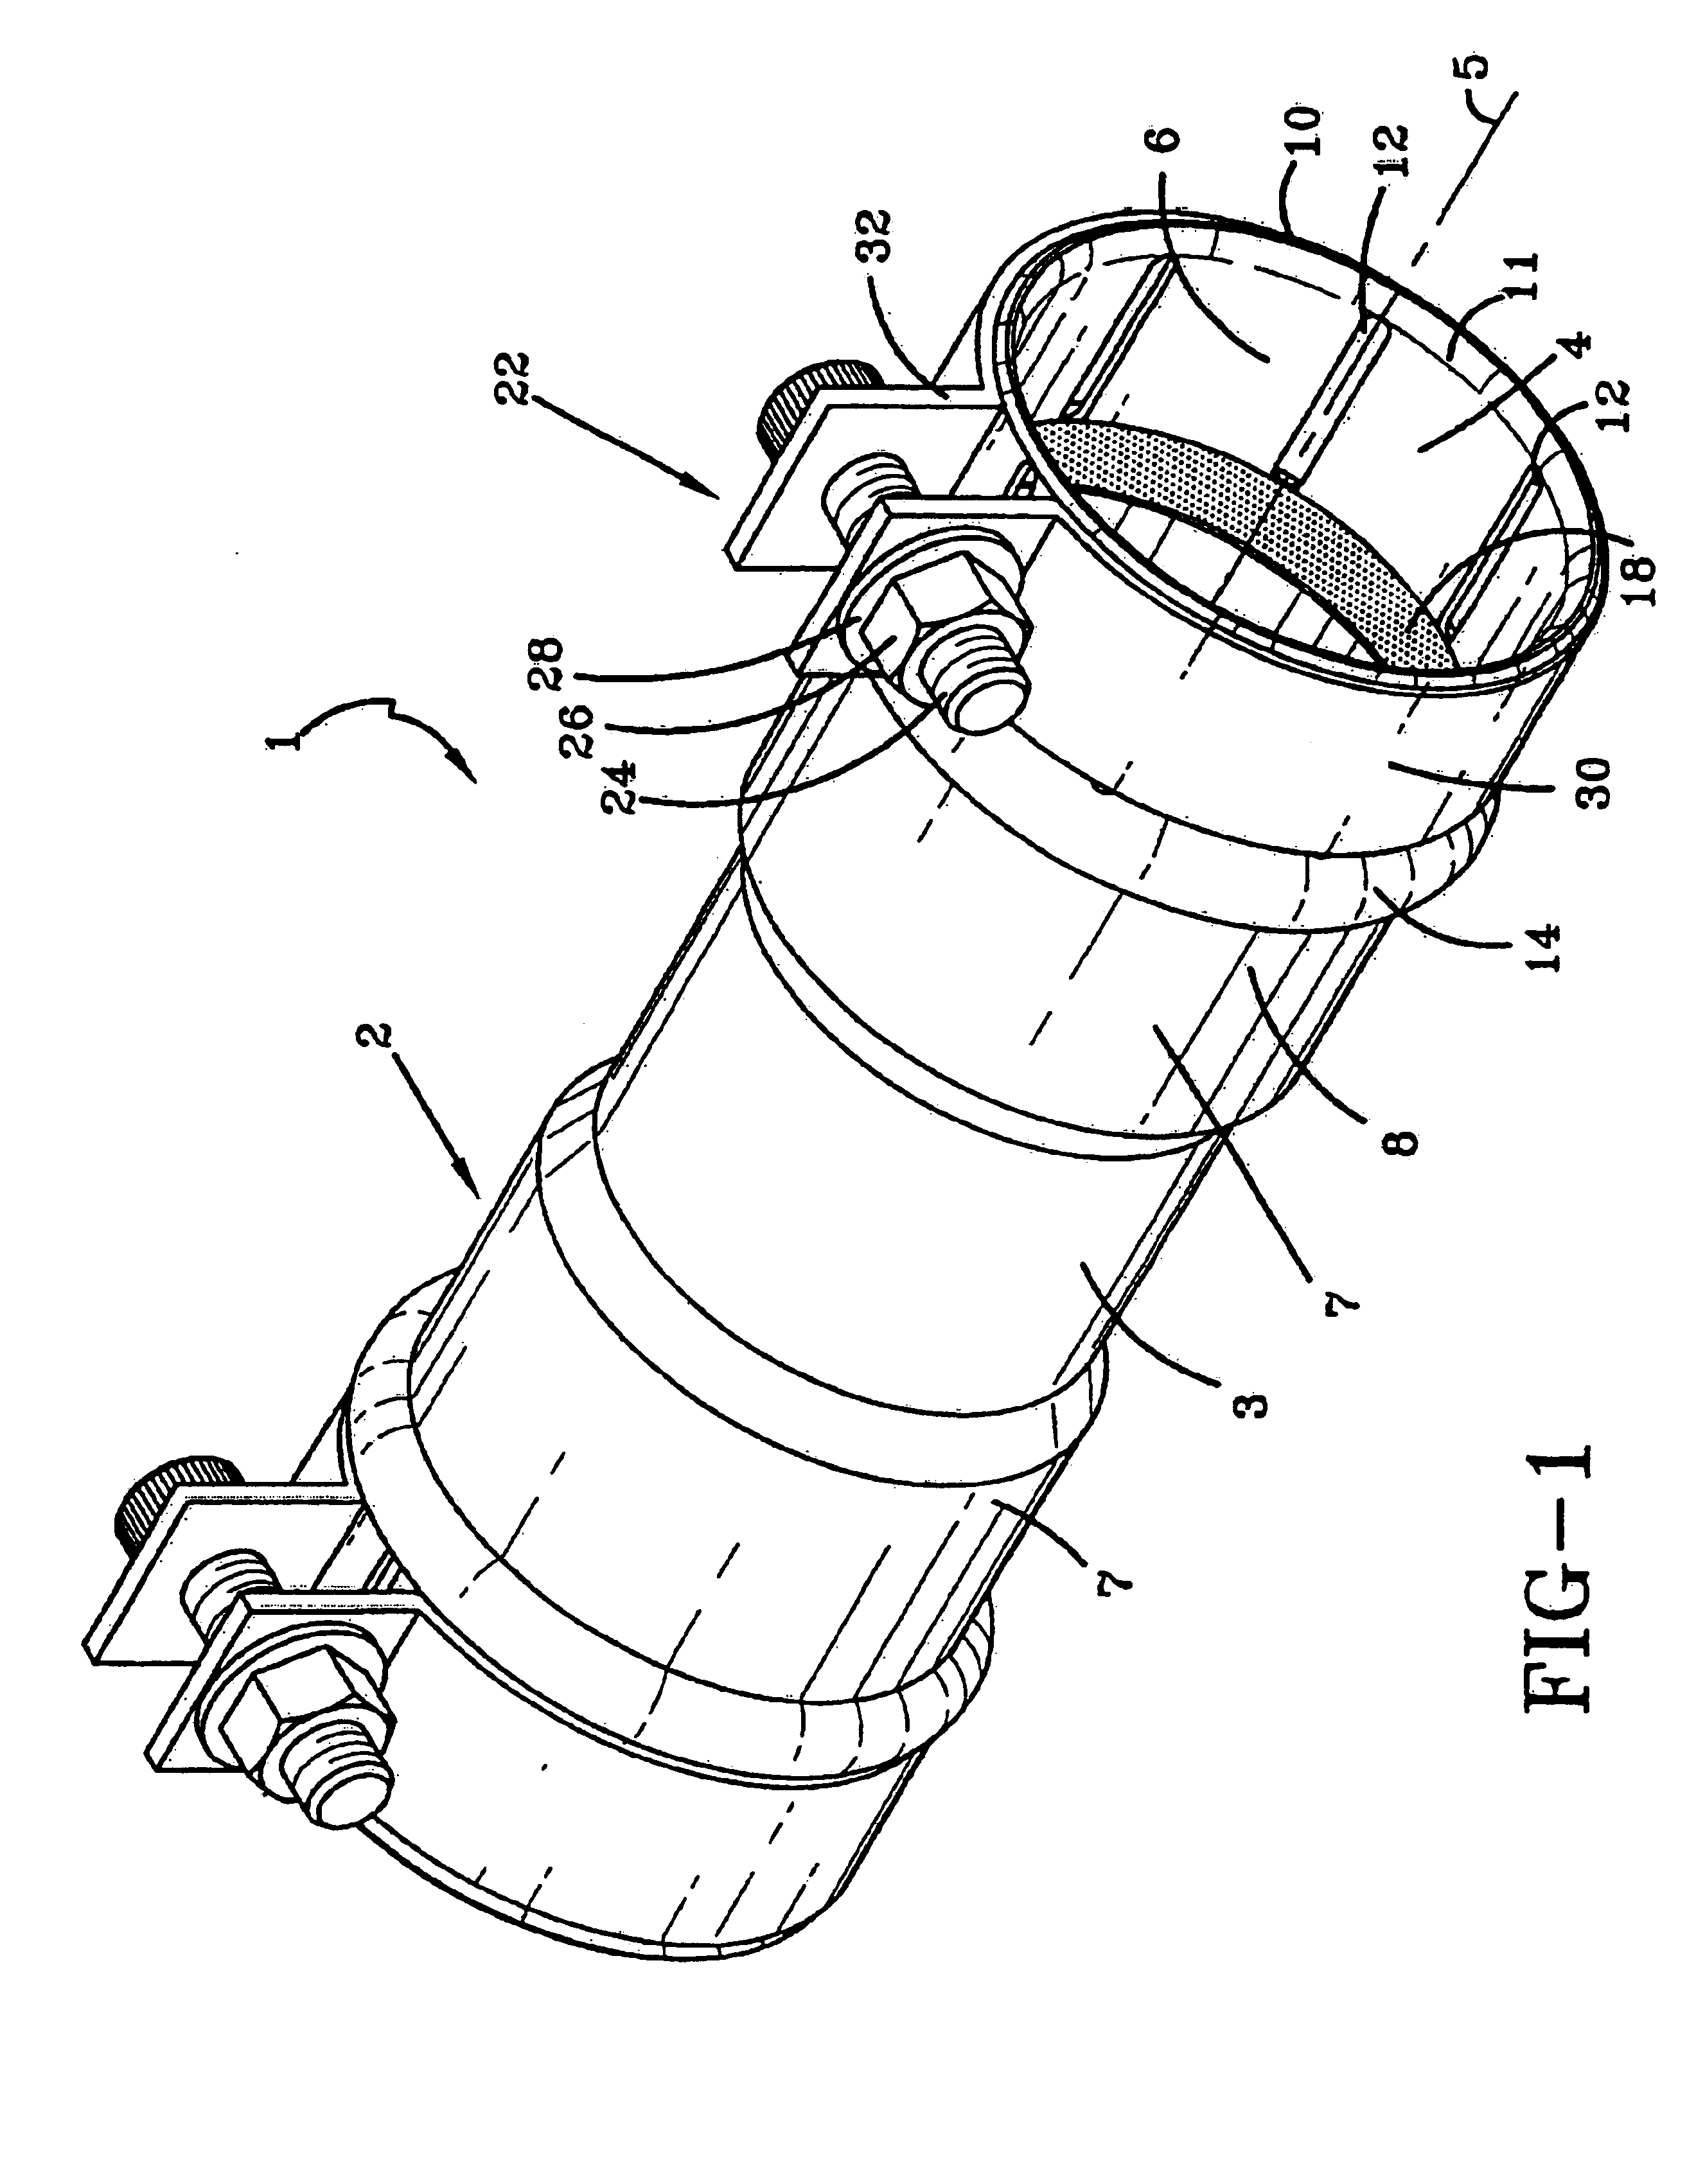 Coupler for low pressure piping system